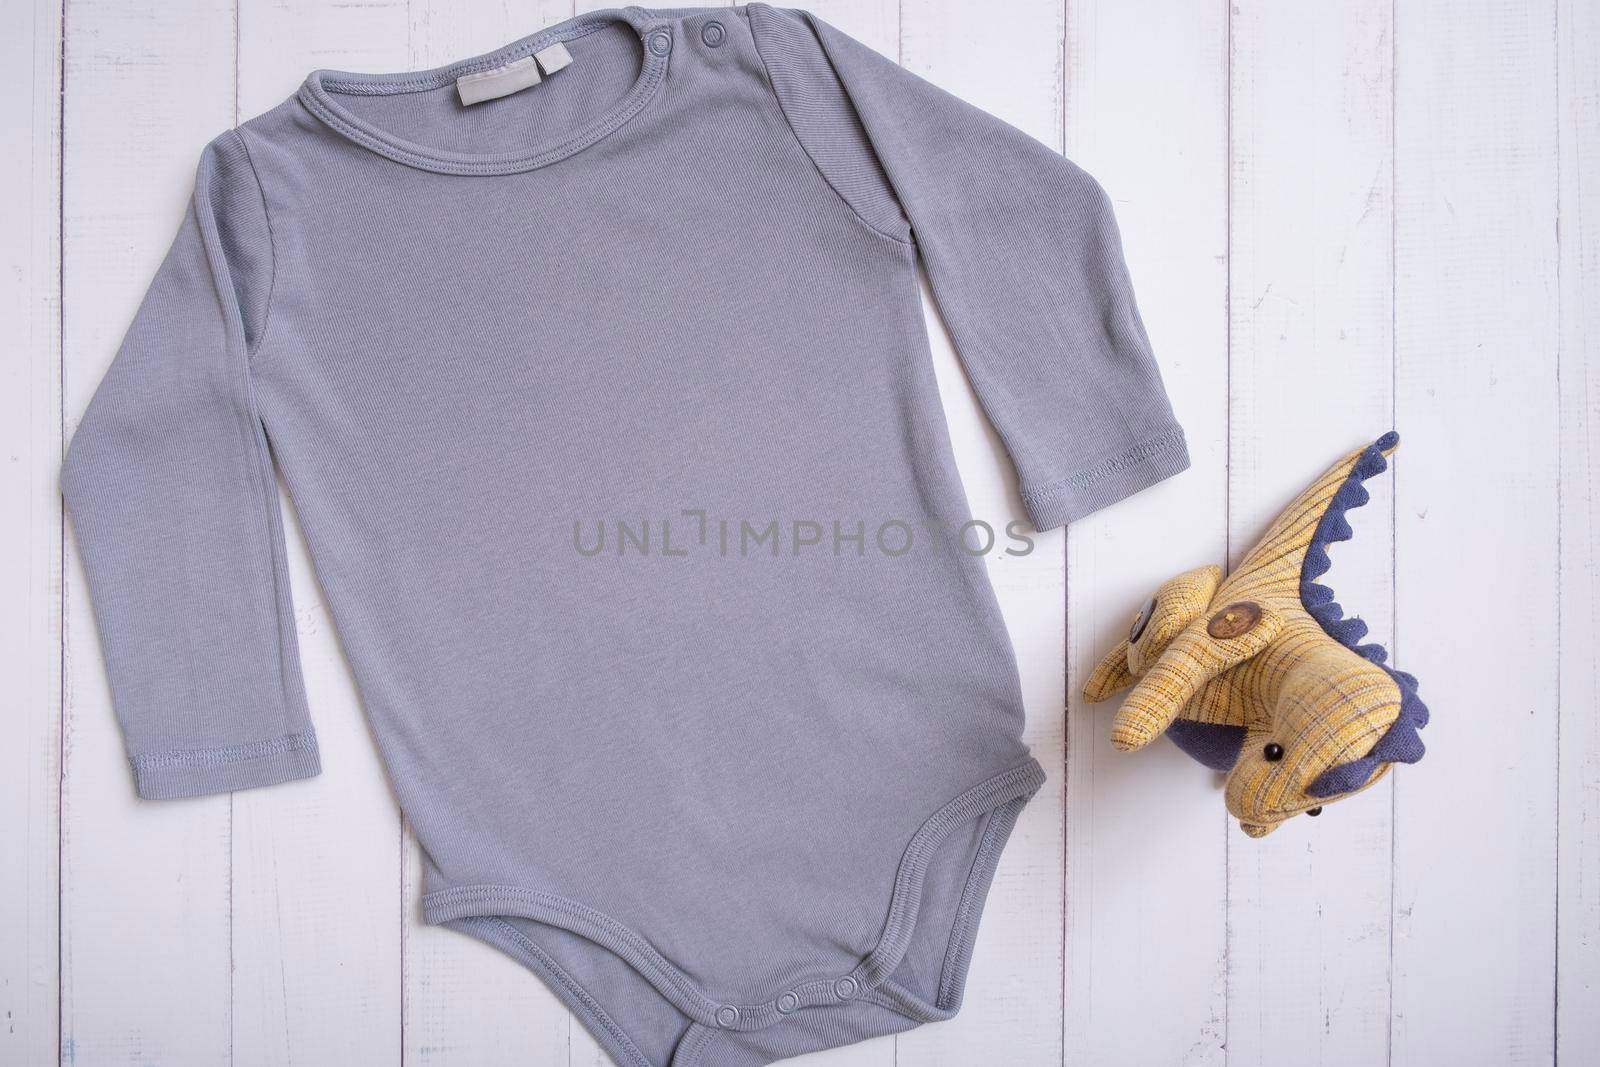 Grey baby bodysuit top view. Mock up for logo, text or design on wooden background. Flat lay with dinosaur.